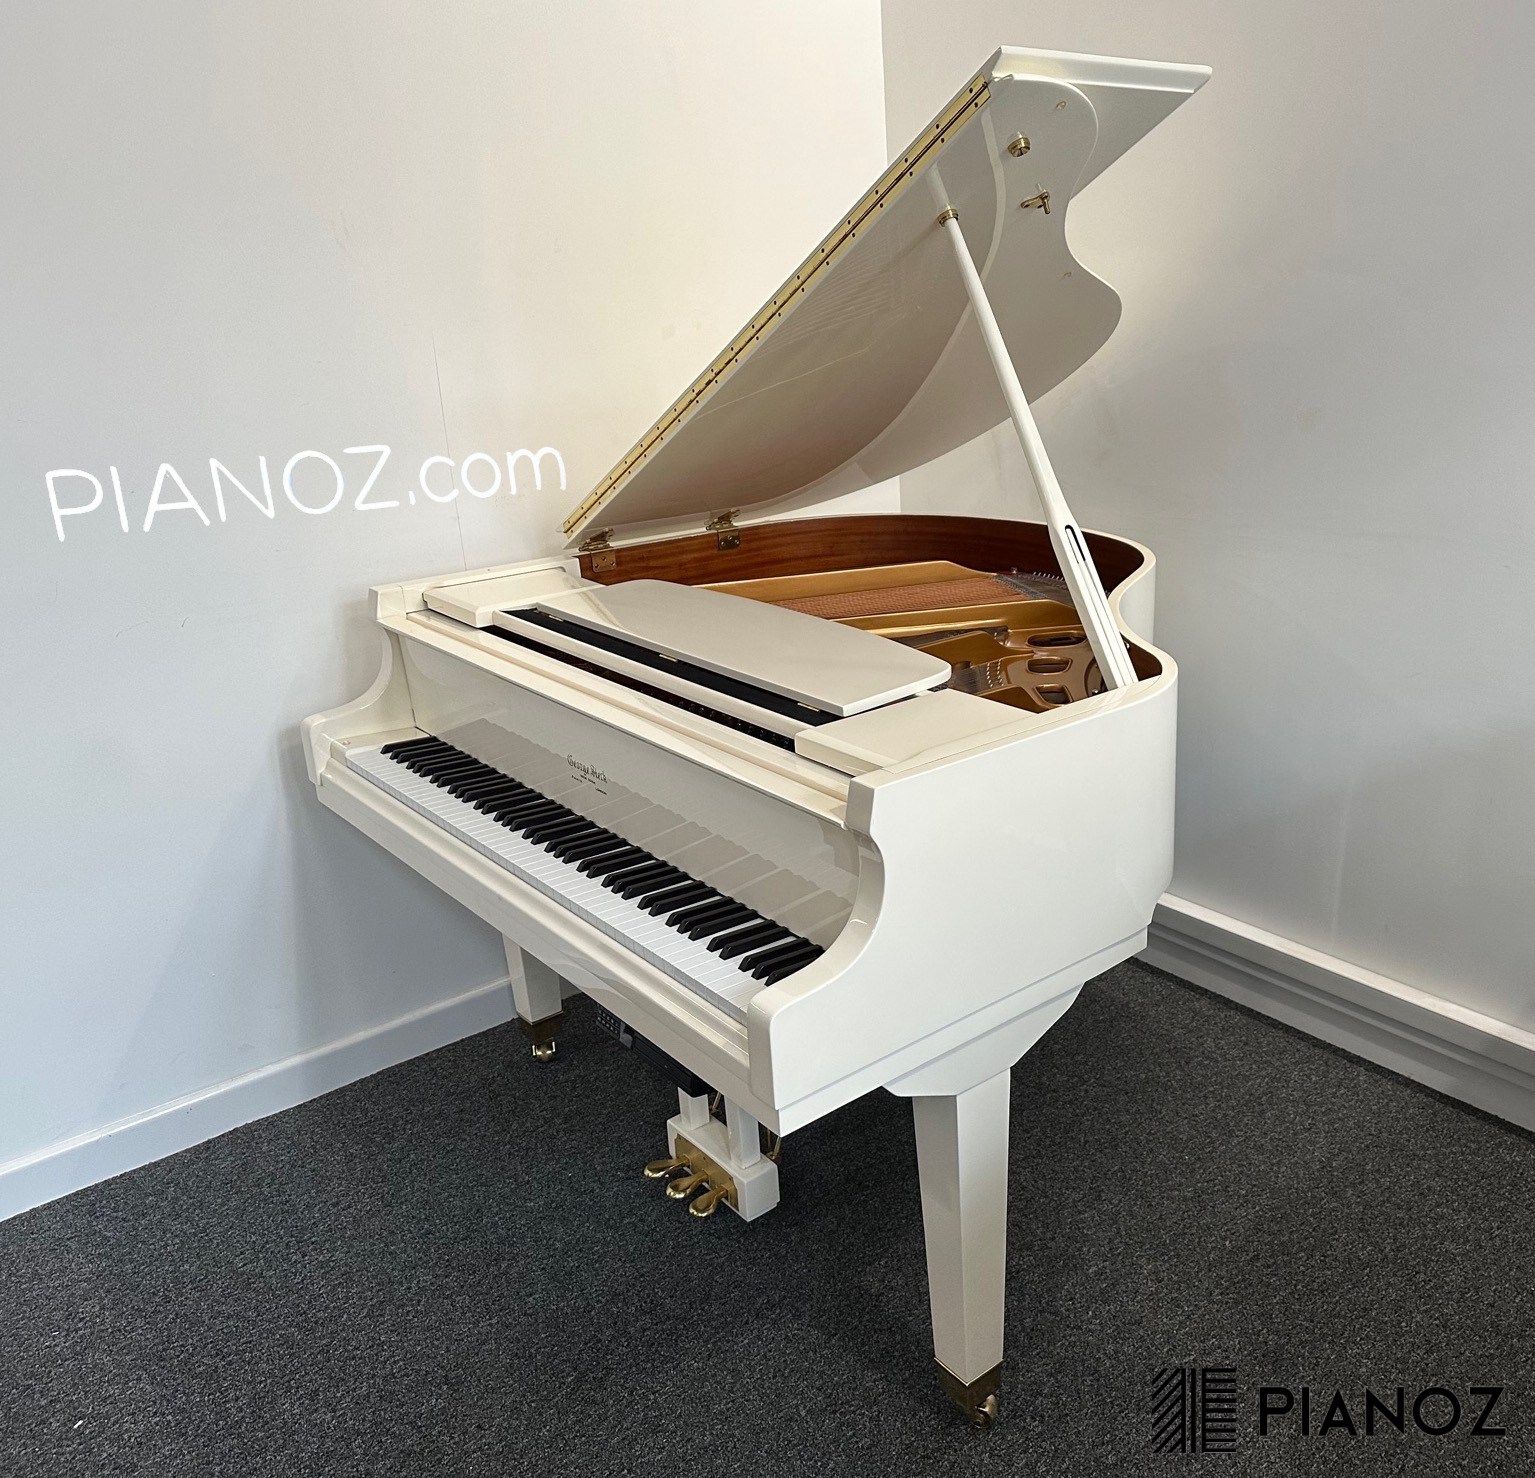 George Steck Pianodisc Self Playing Baby Grand Piano piano for sale in UK